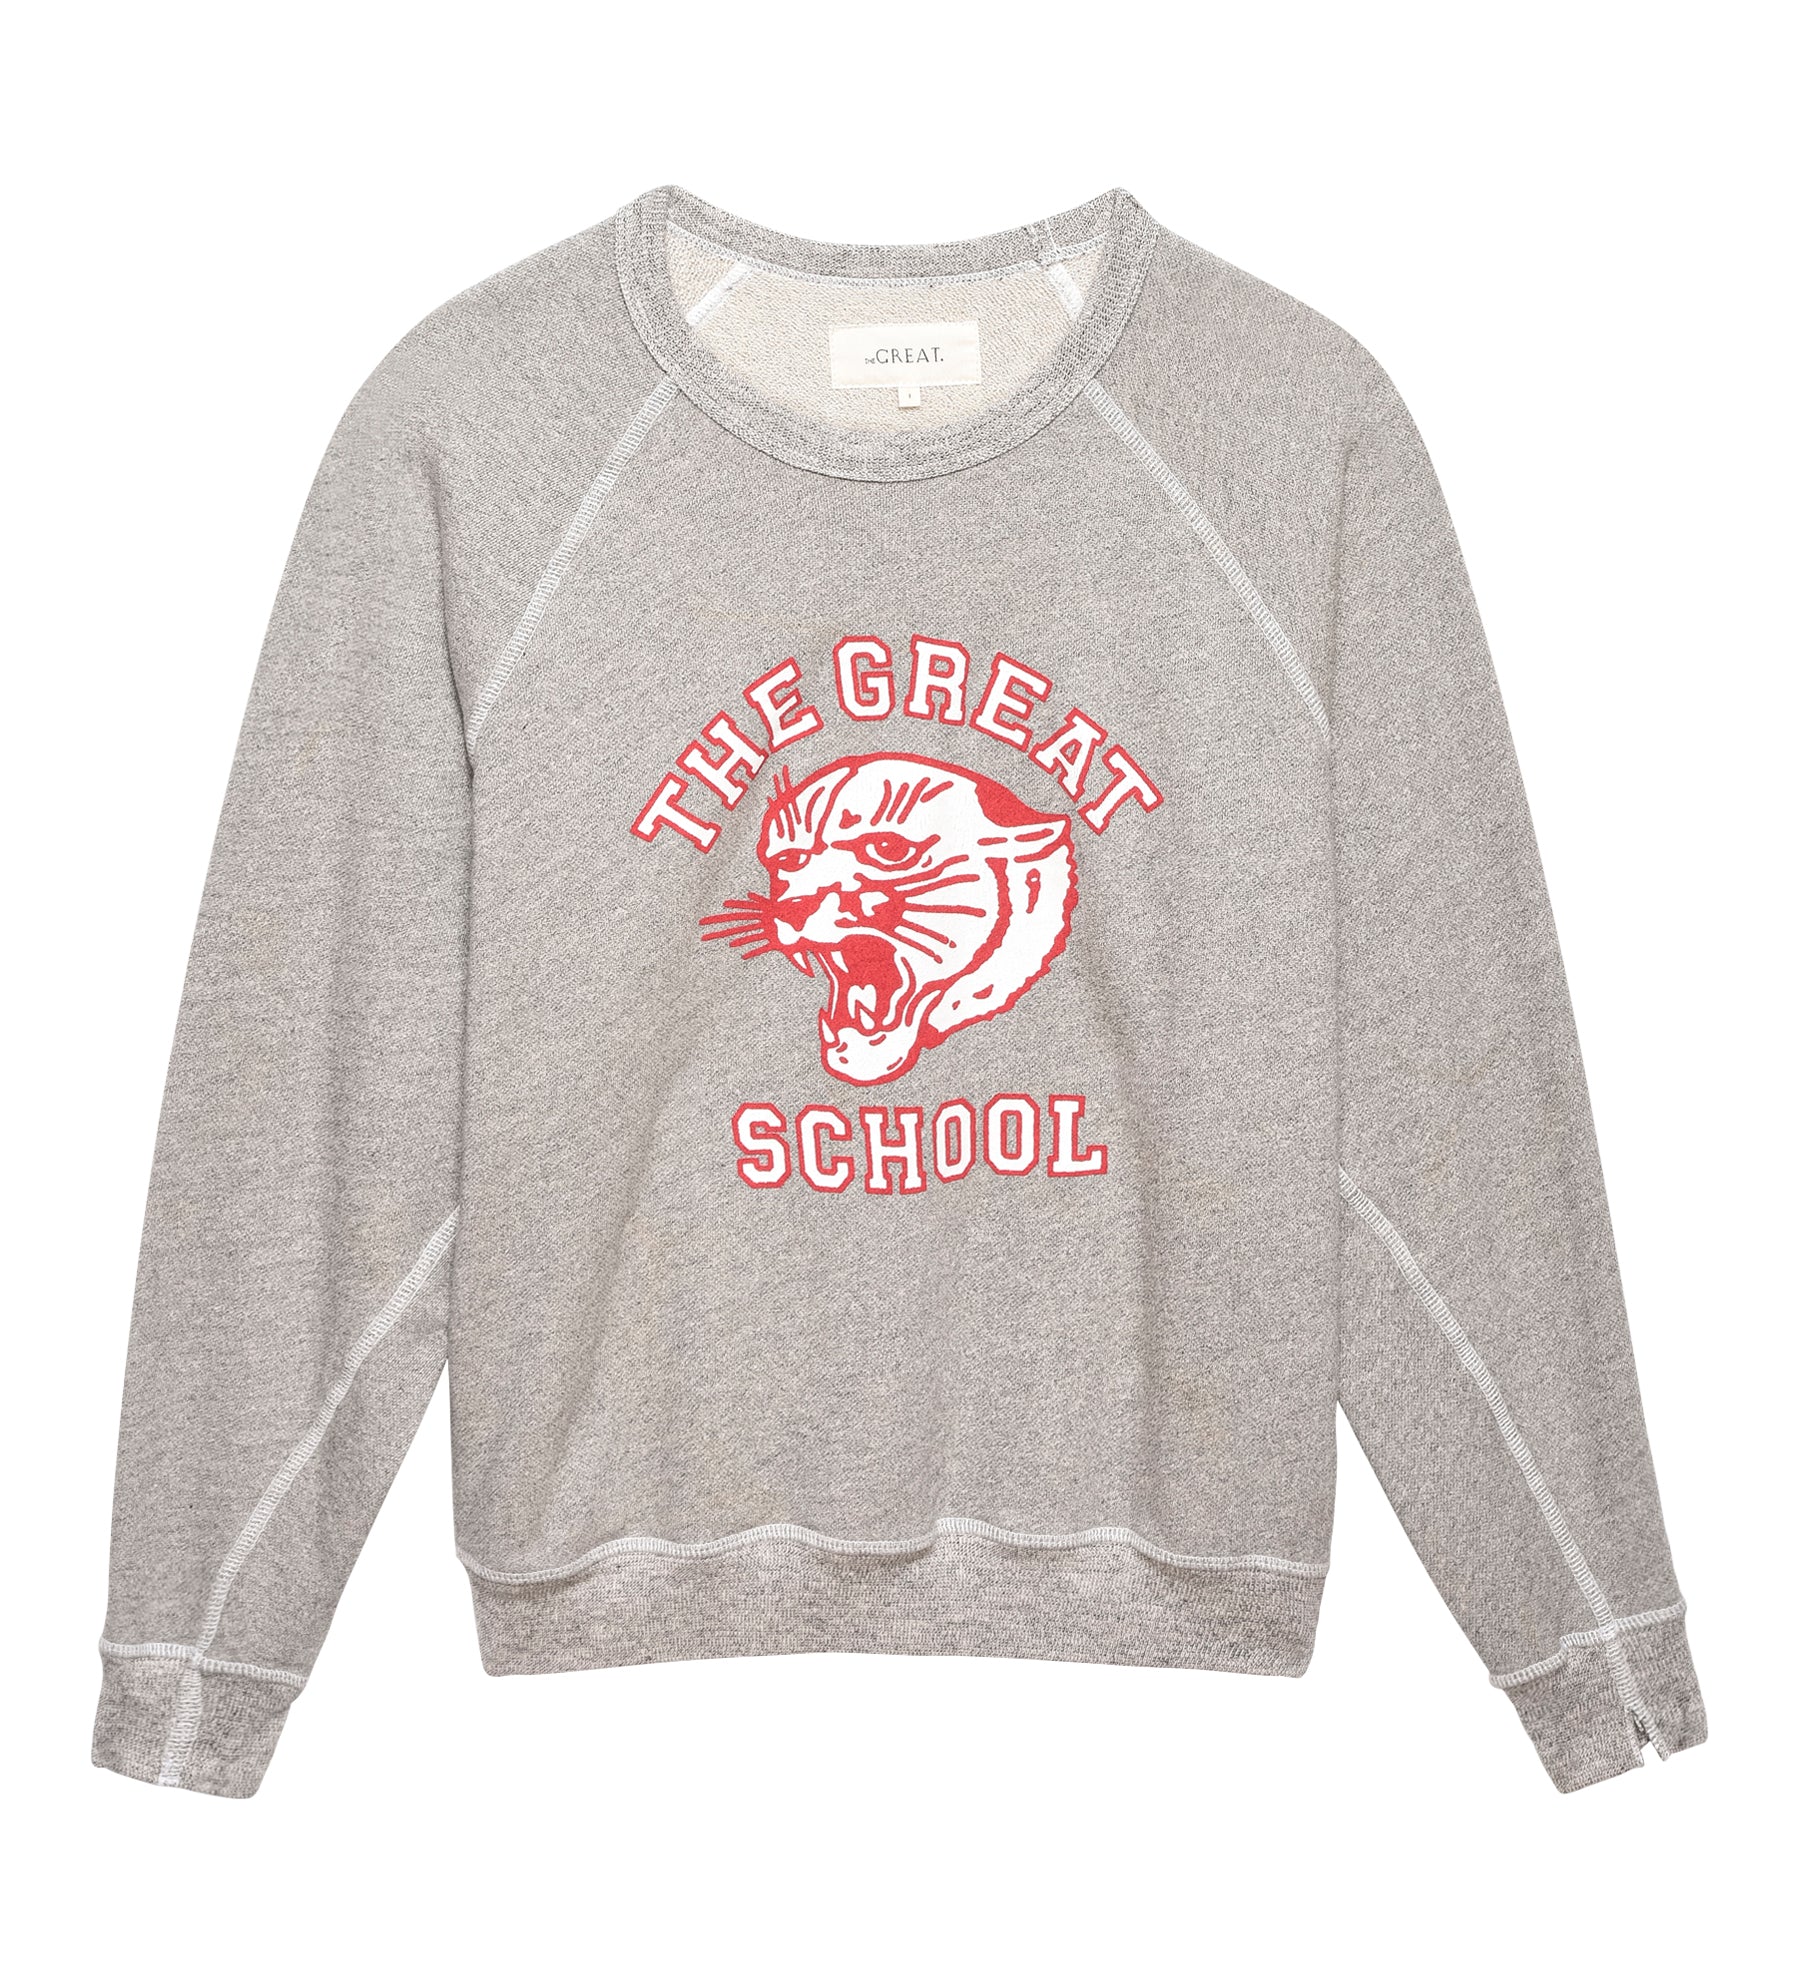 THE GREAT. The College Sweatshirt w/ Bobcat Graphic